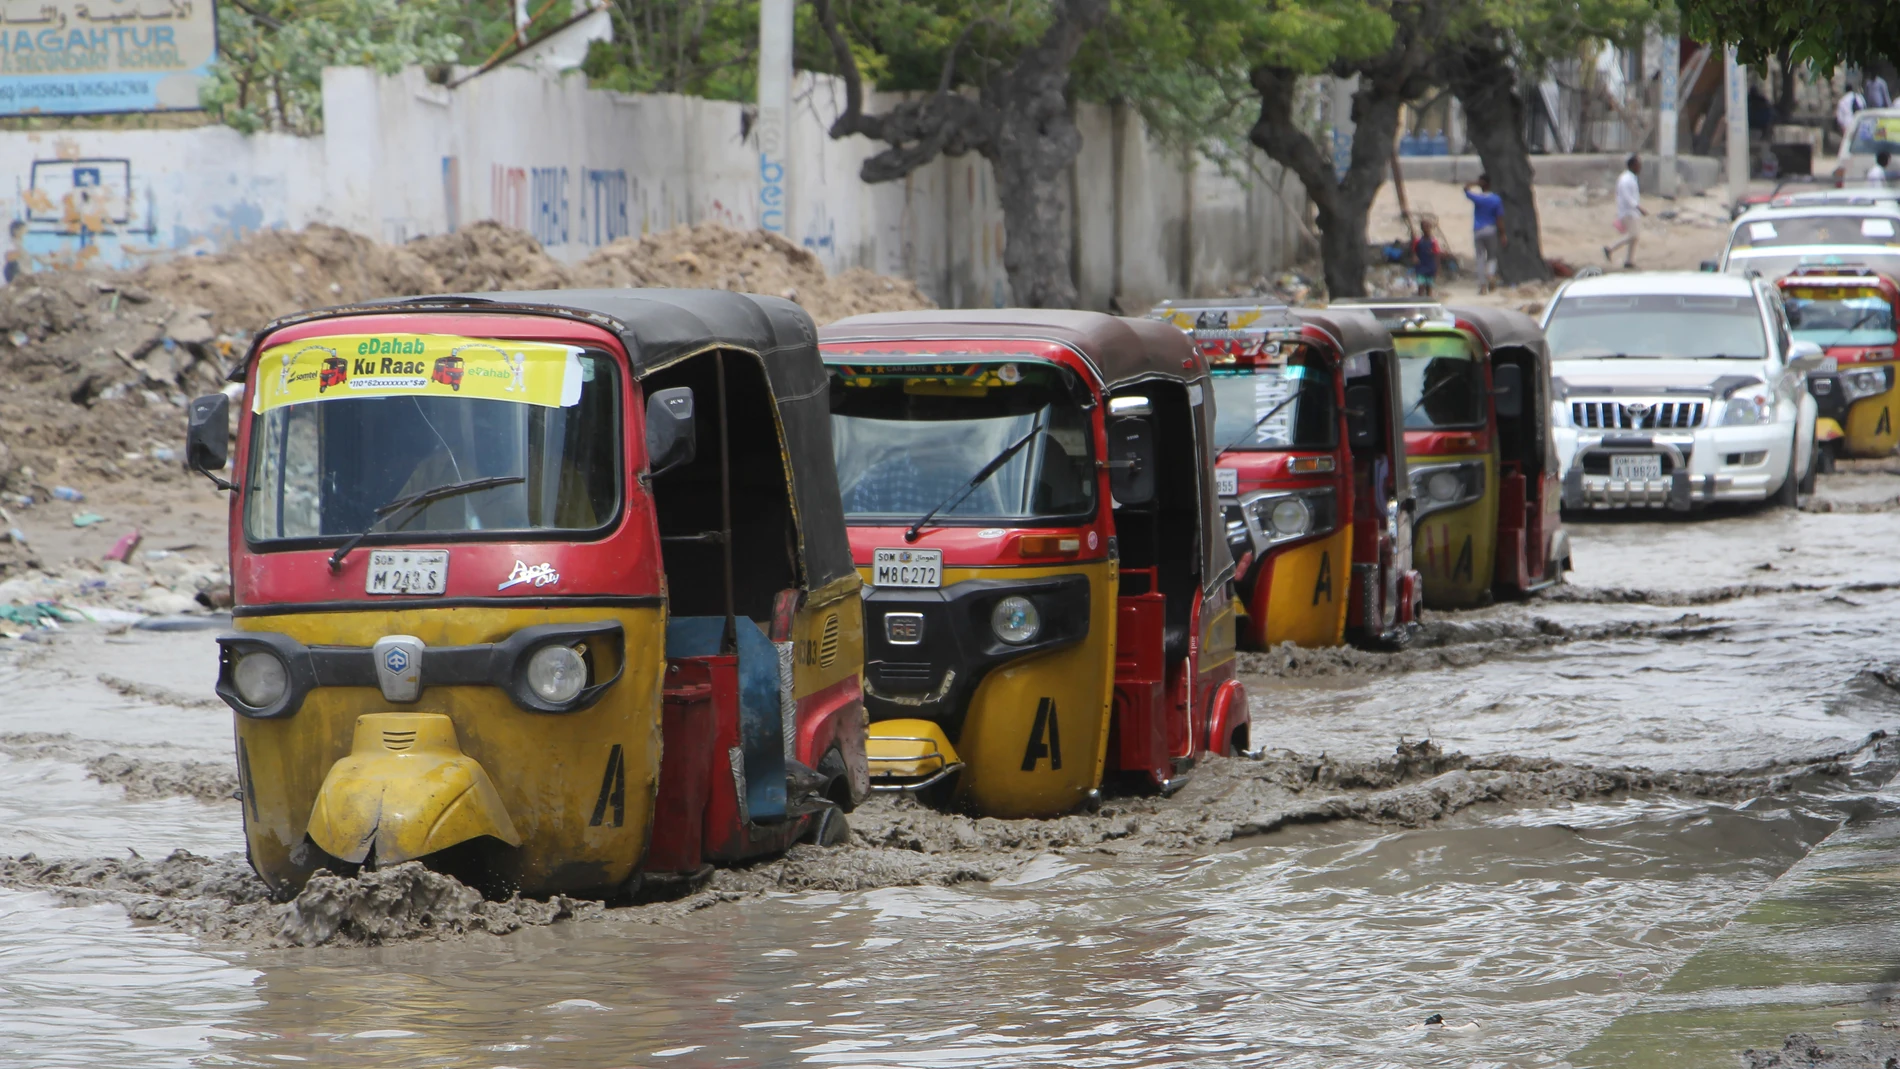 Tuktuks pass through a flooded road after heavy rain in Mogadishu, Somalia, Monday, Nov. 13, 2023. Since October, floods caused by torrential rainfall have displaced nearly half a million people and disrupted the lives of over 1.2 million people, and have caused extensive damage to civilian infrastructure notably in the Gedo region of southern Somalia, officials said. (AP Photo/Farah Abdi Warsameh)